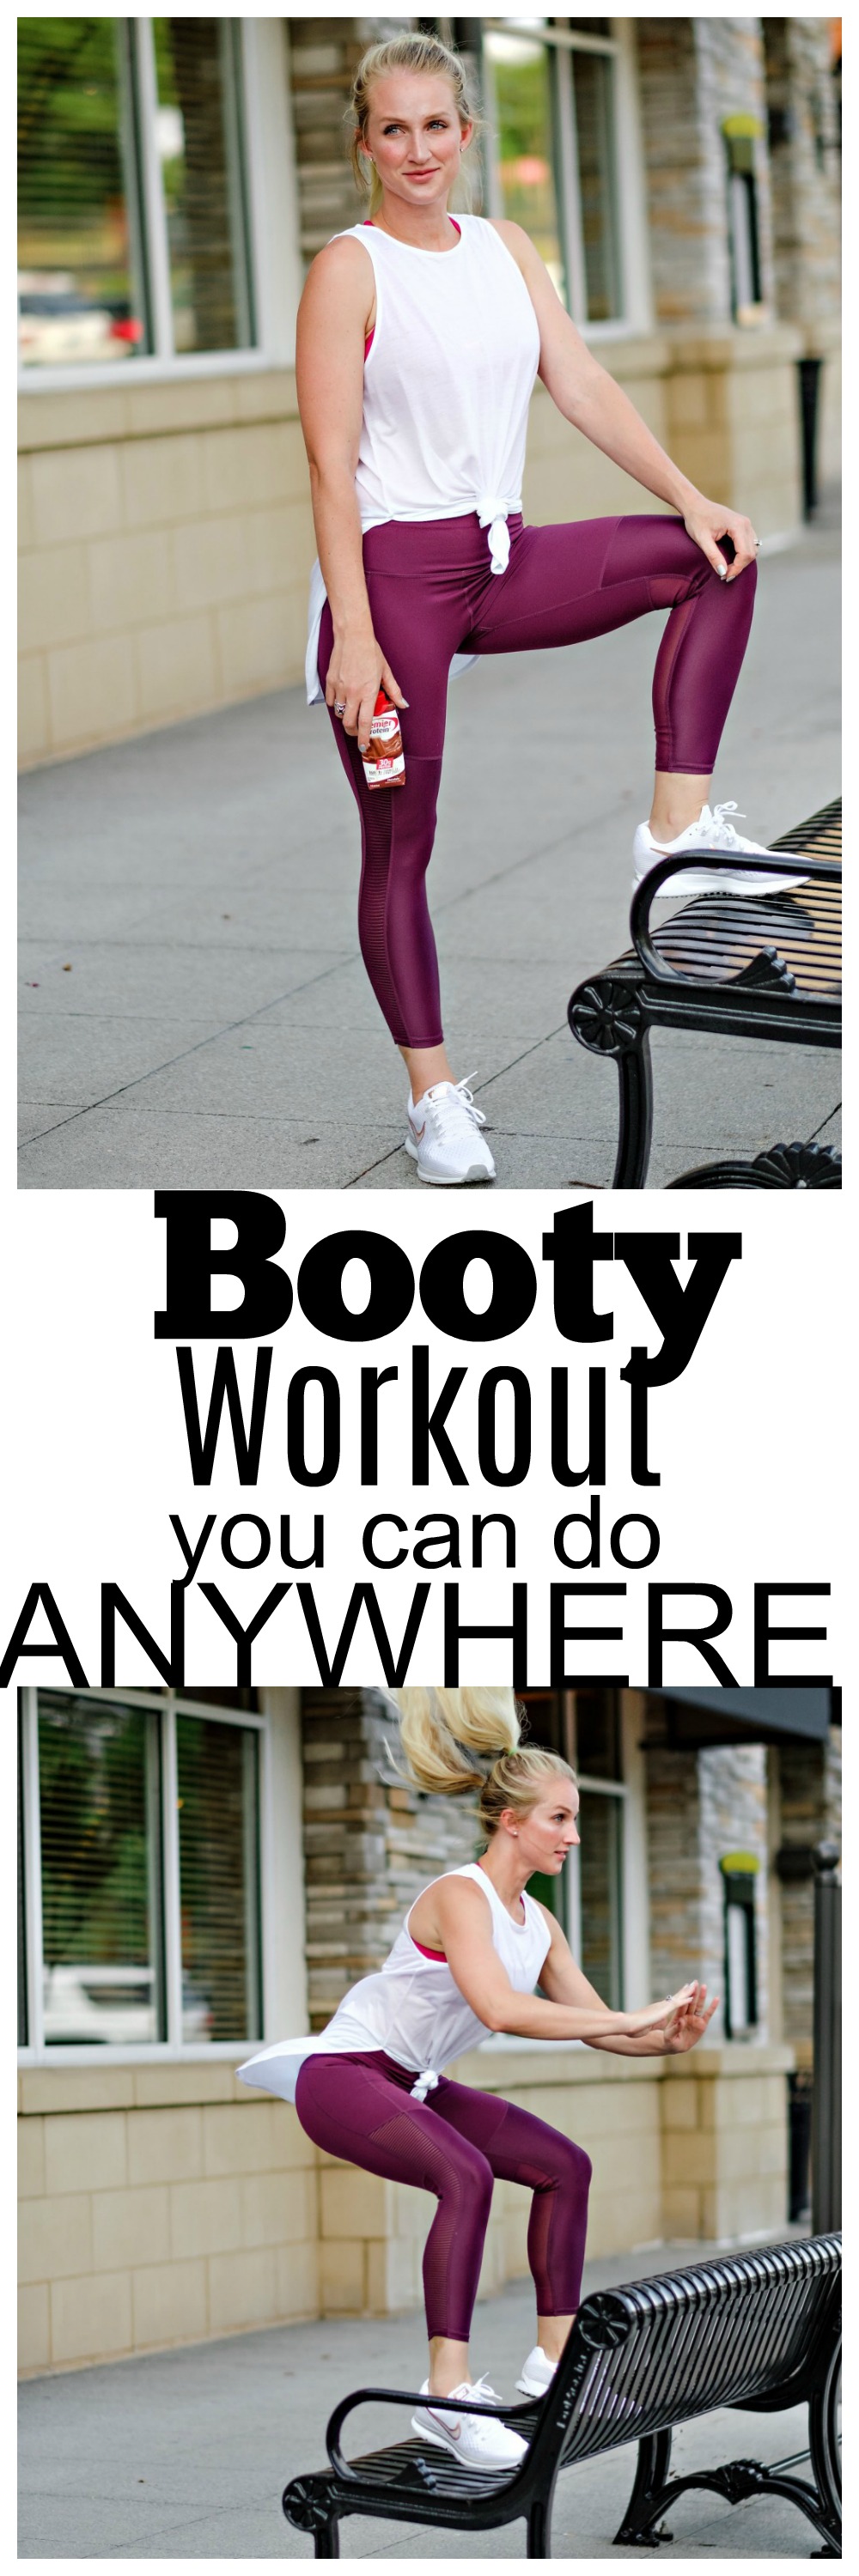 booty workout you can do anywhere - Butt Workout You Can Do Anywhere by Atlanta fitness blogger Happily Hughes